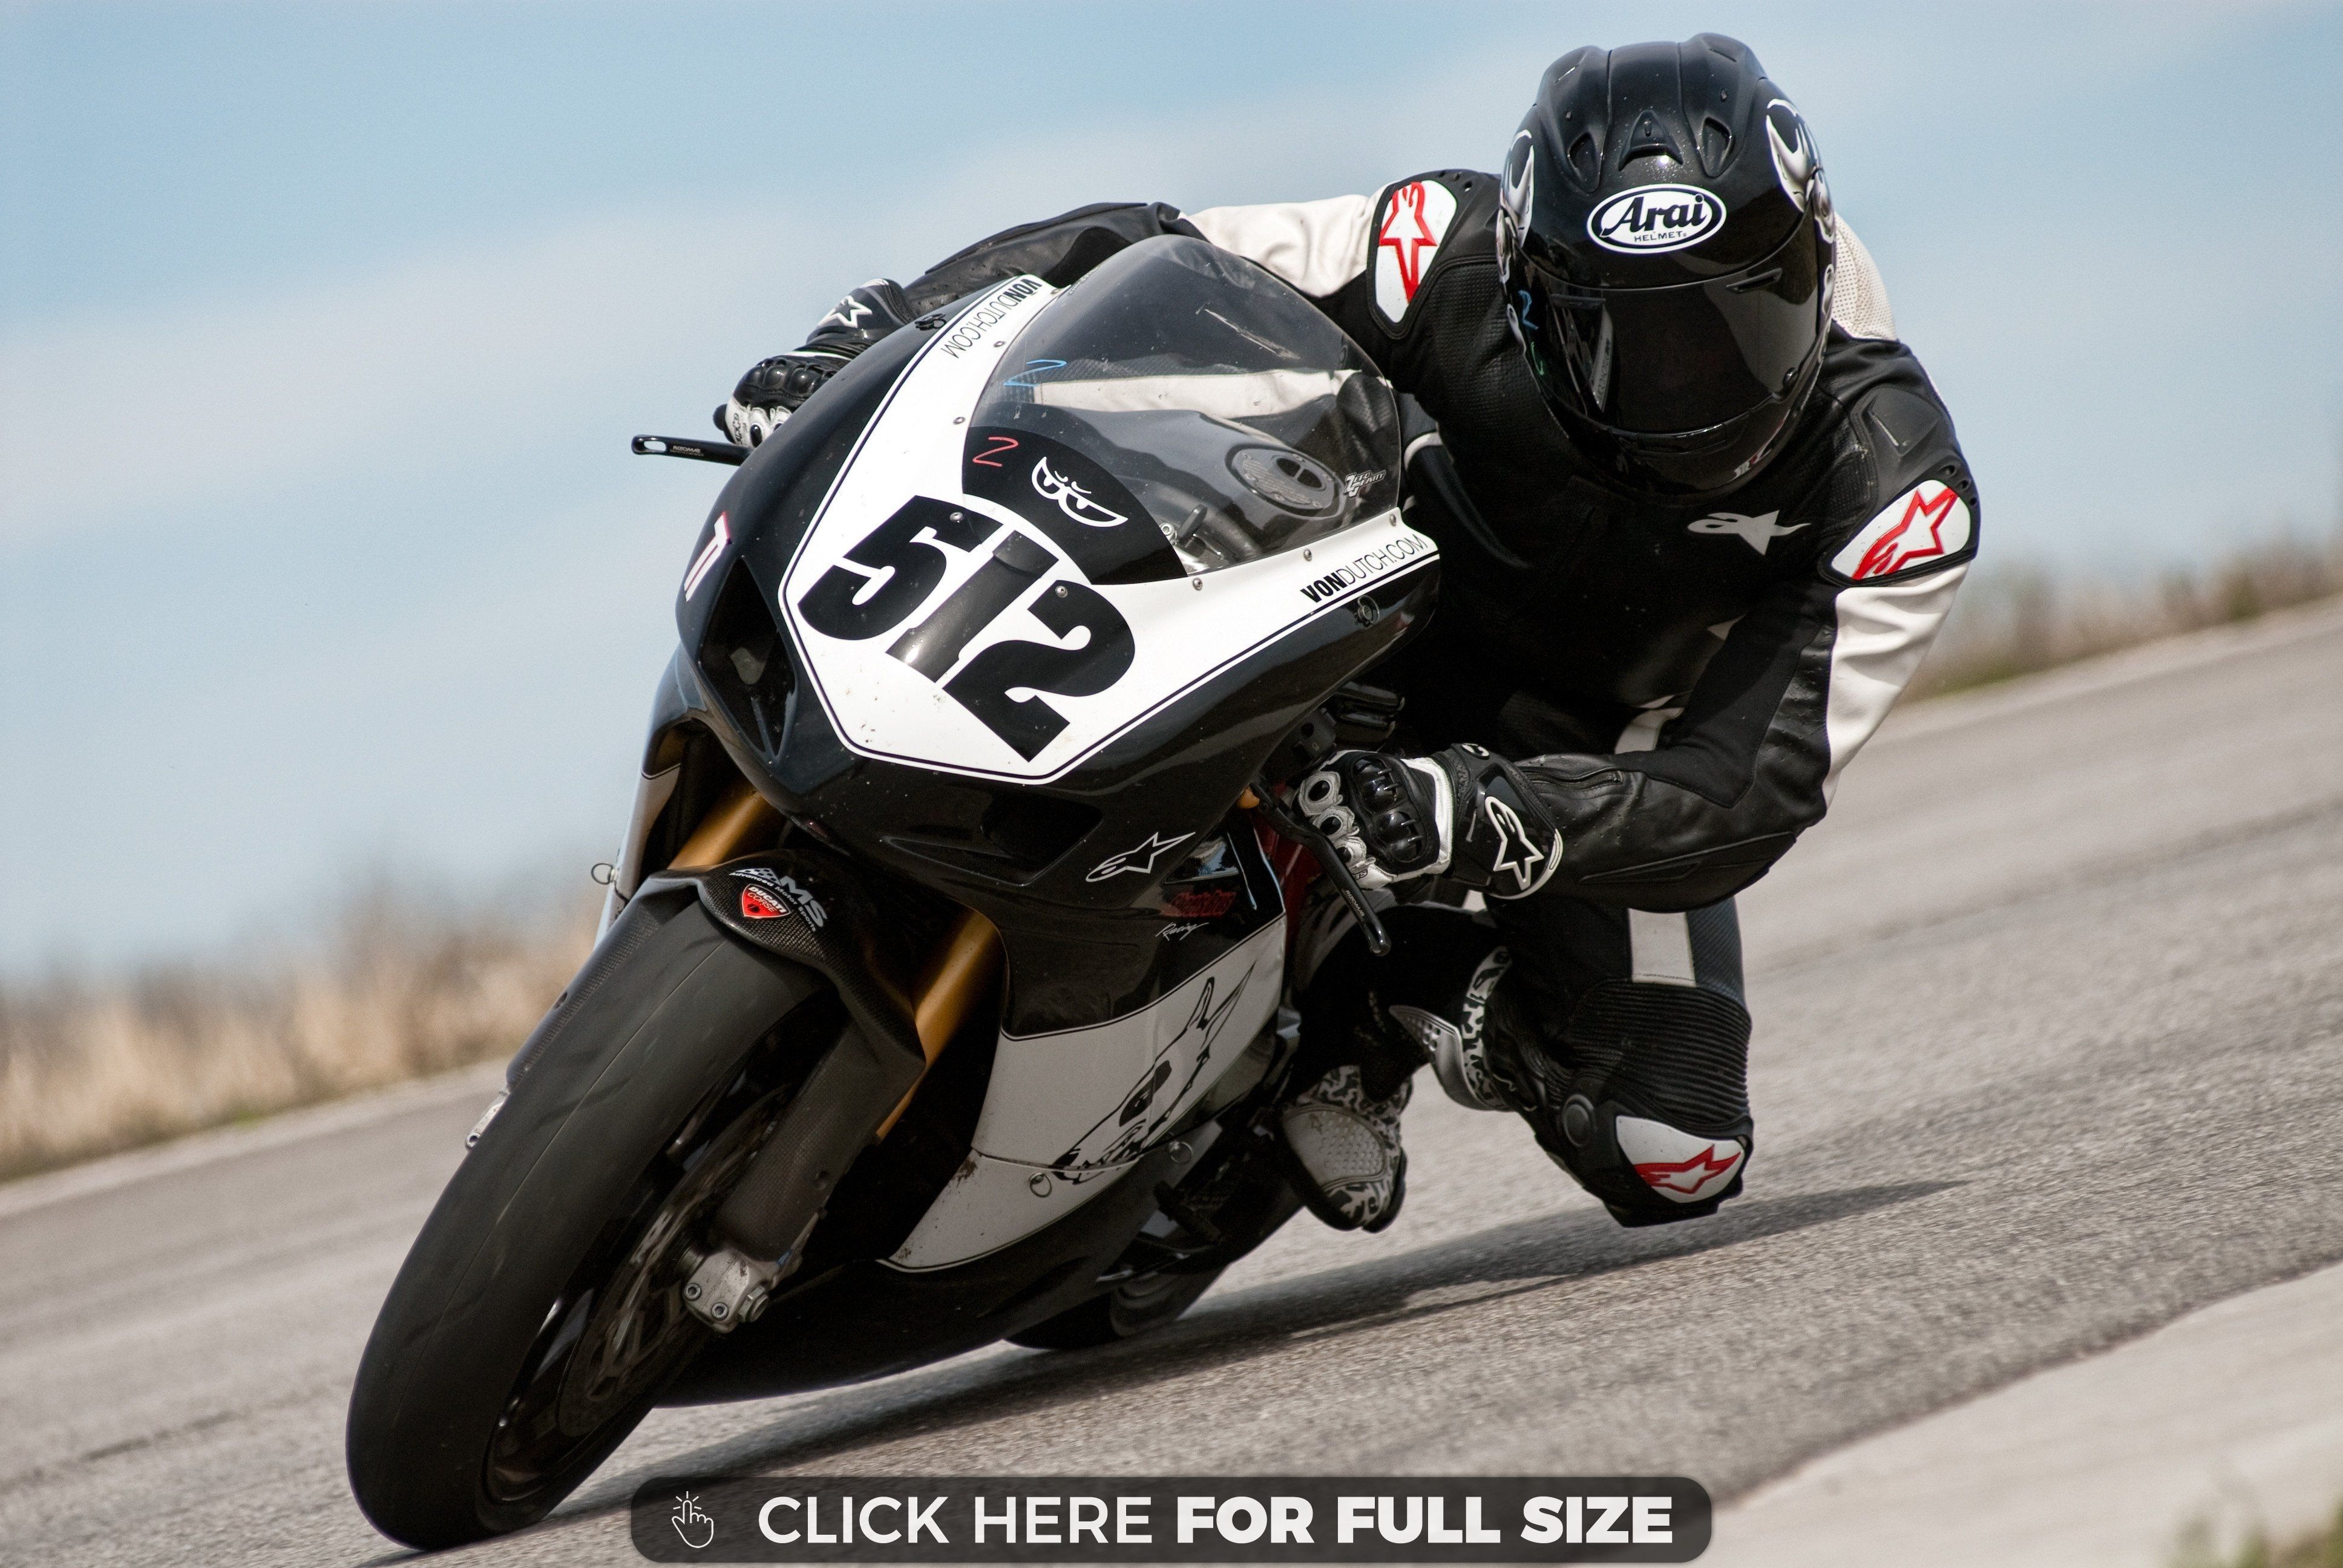 Motorcycle Track Day Pics I Took at Harris Hill Ranch in Austin TX